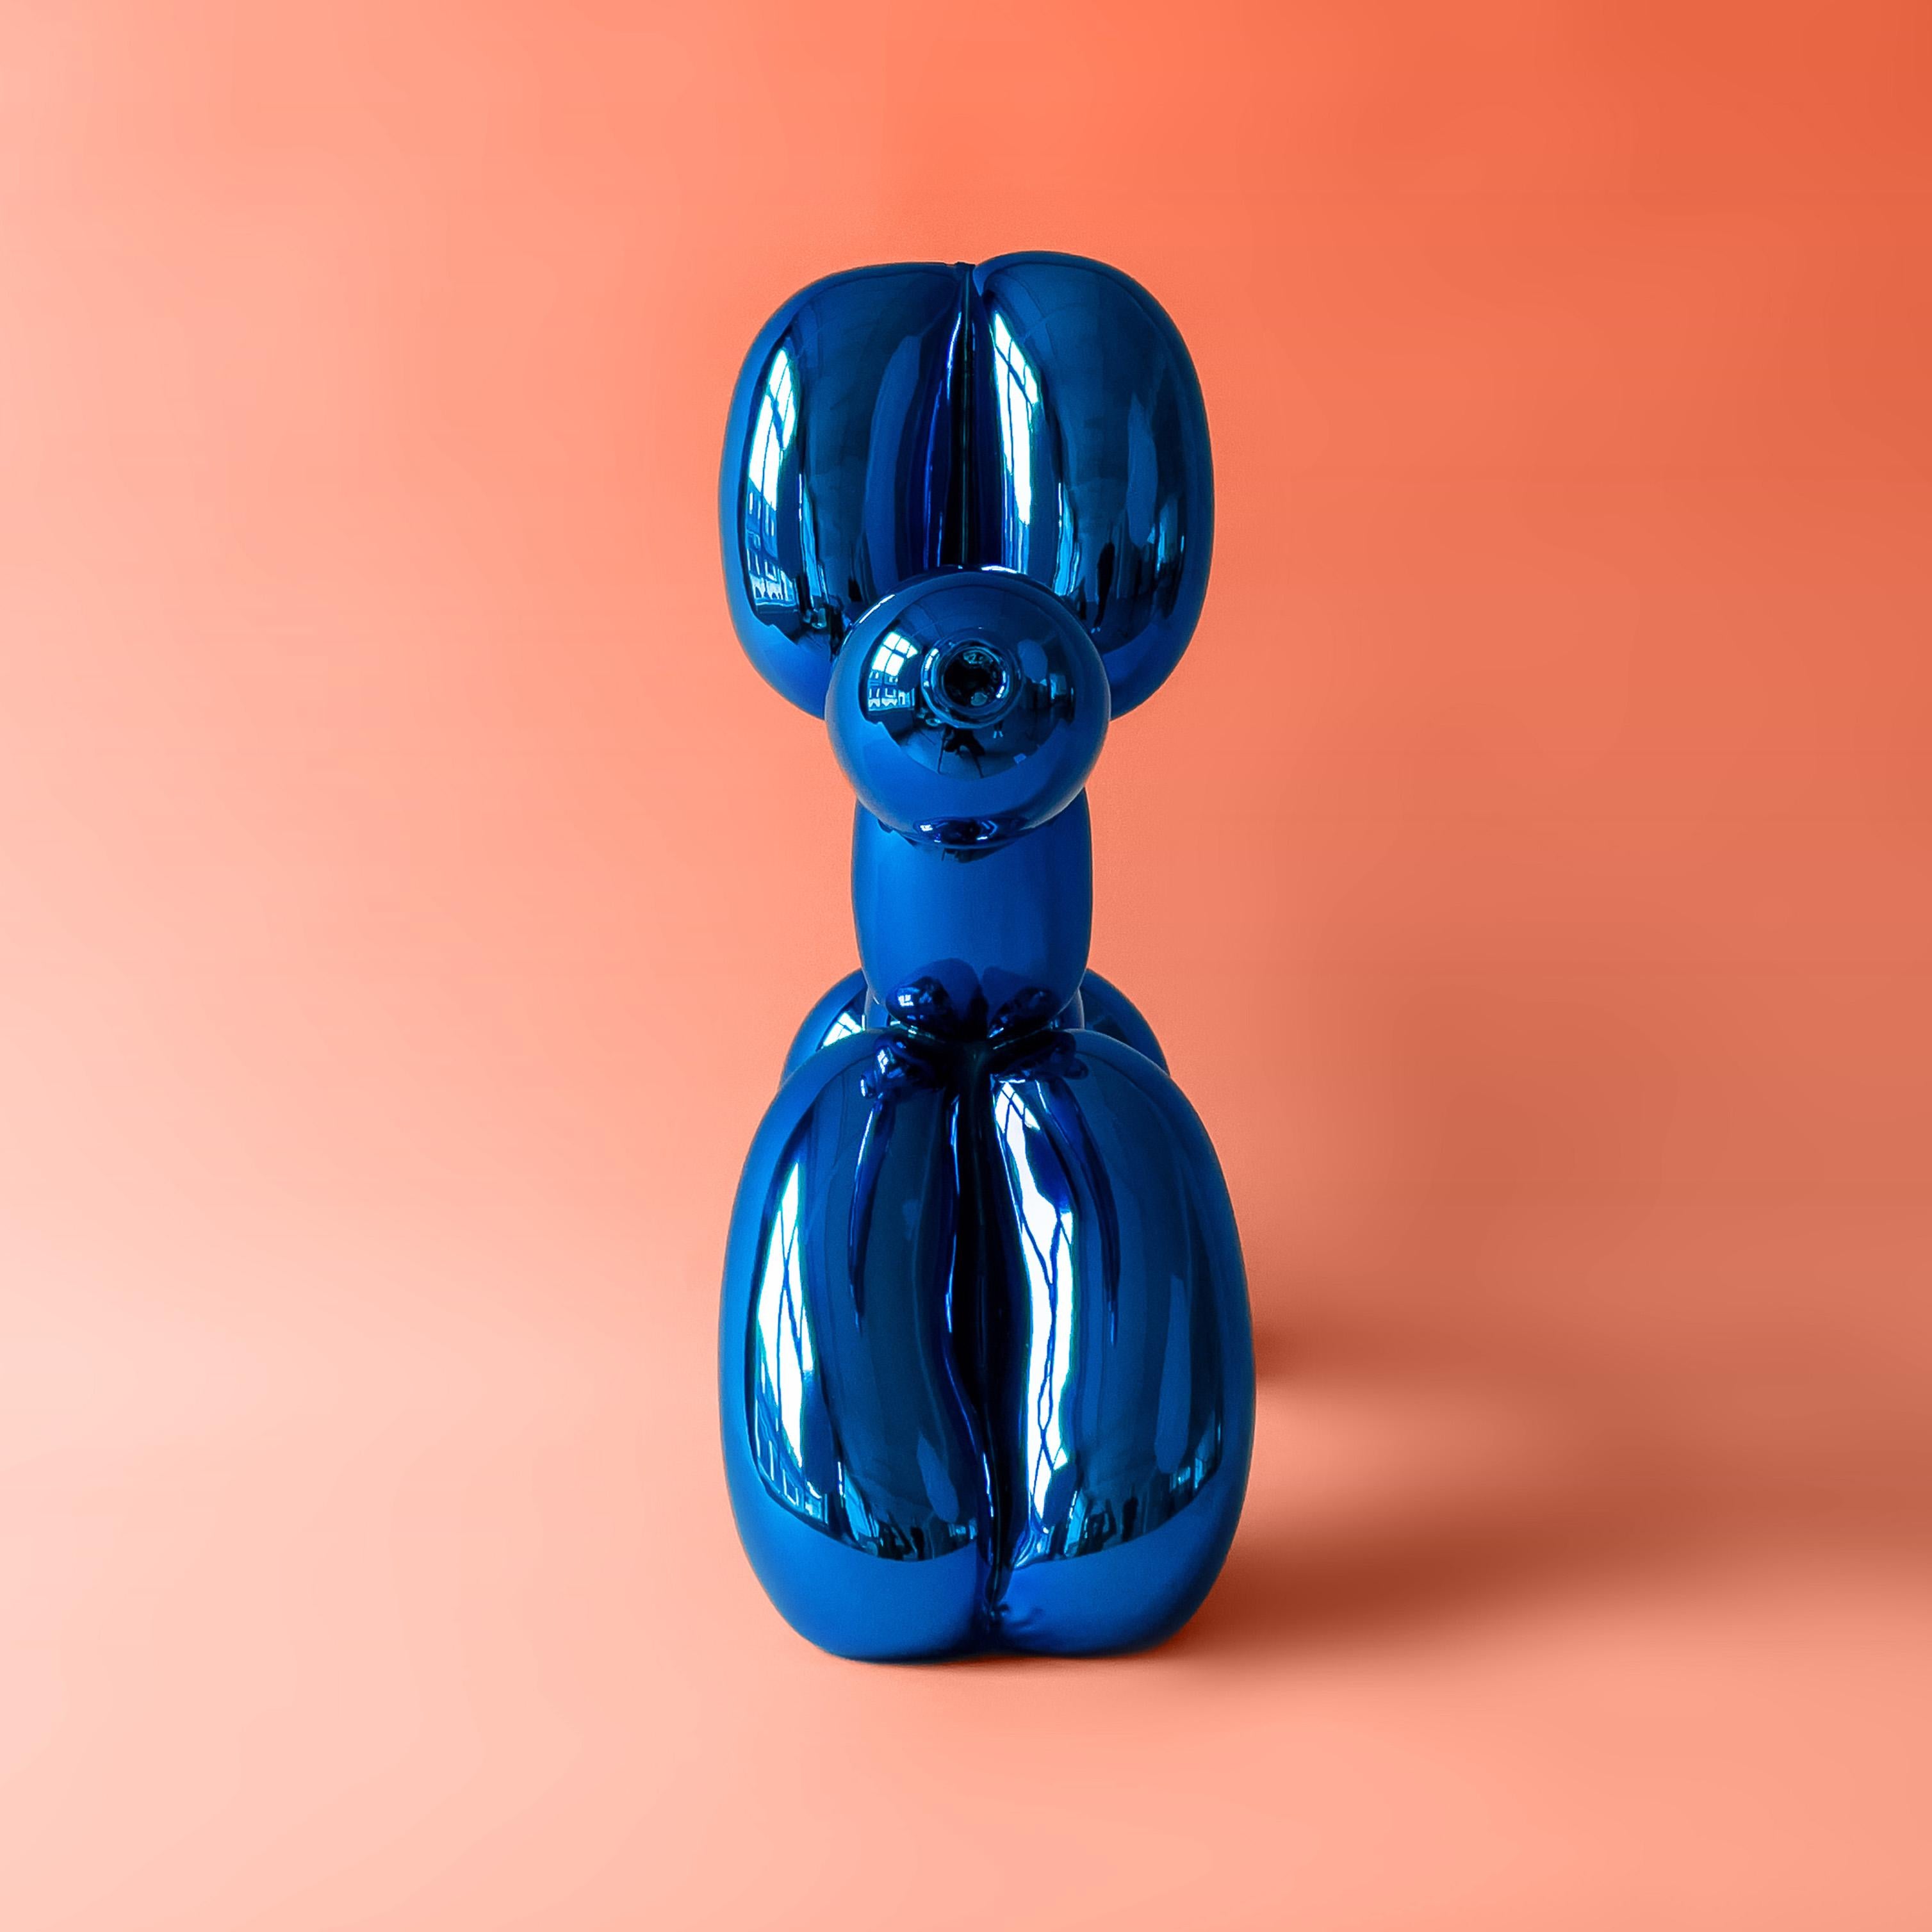 Blue Balloon Dog Sculpture by Jeff Koons, Porcelain, Contemporary Art For Sale 1